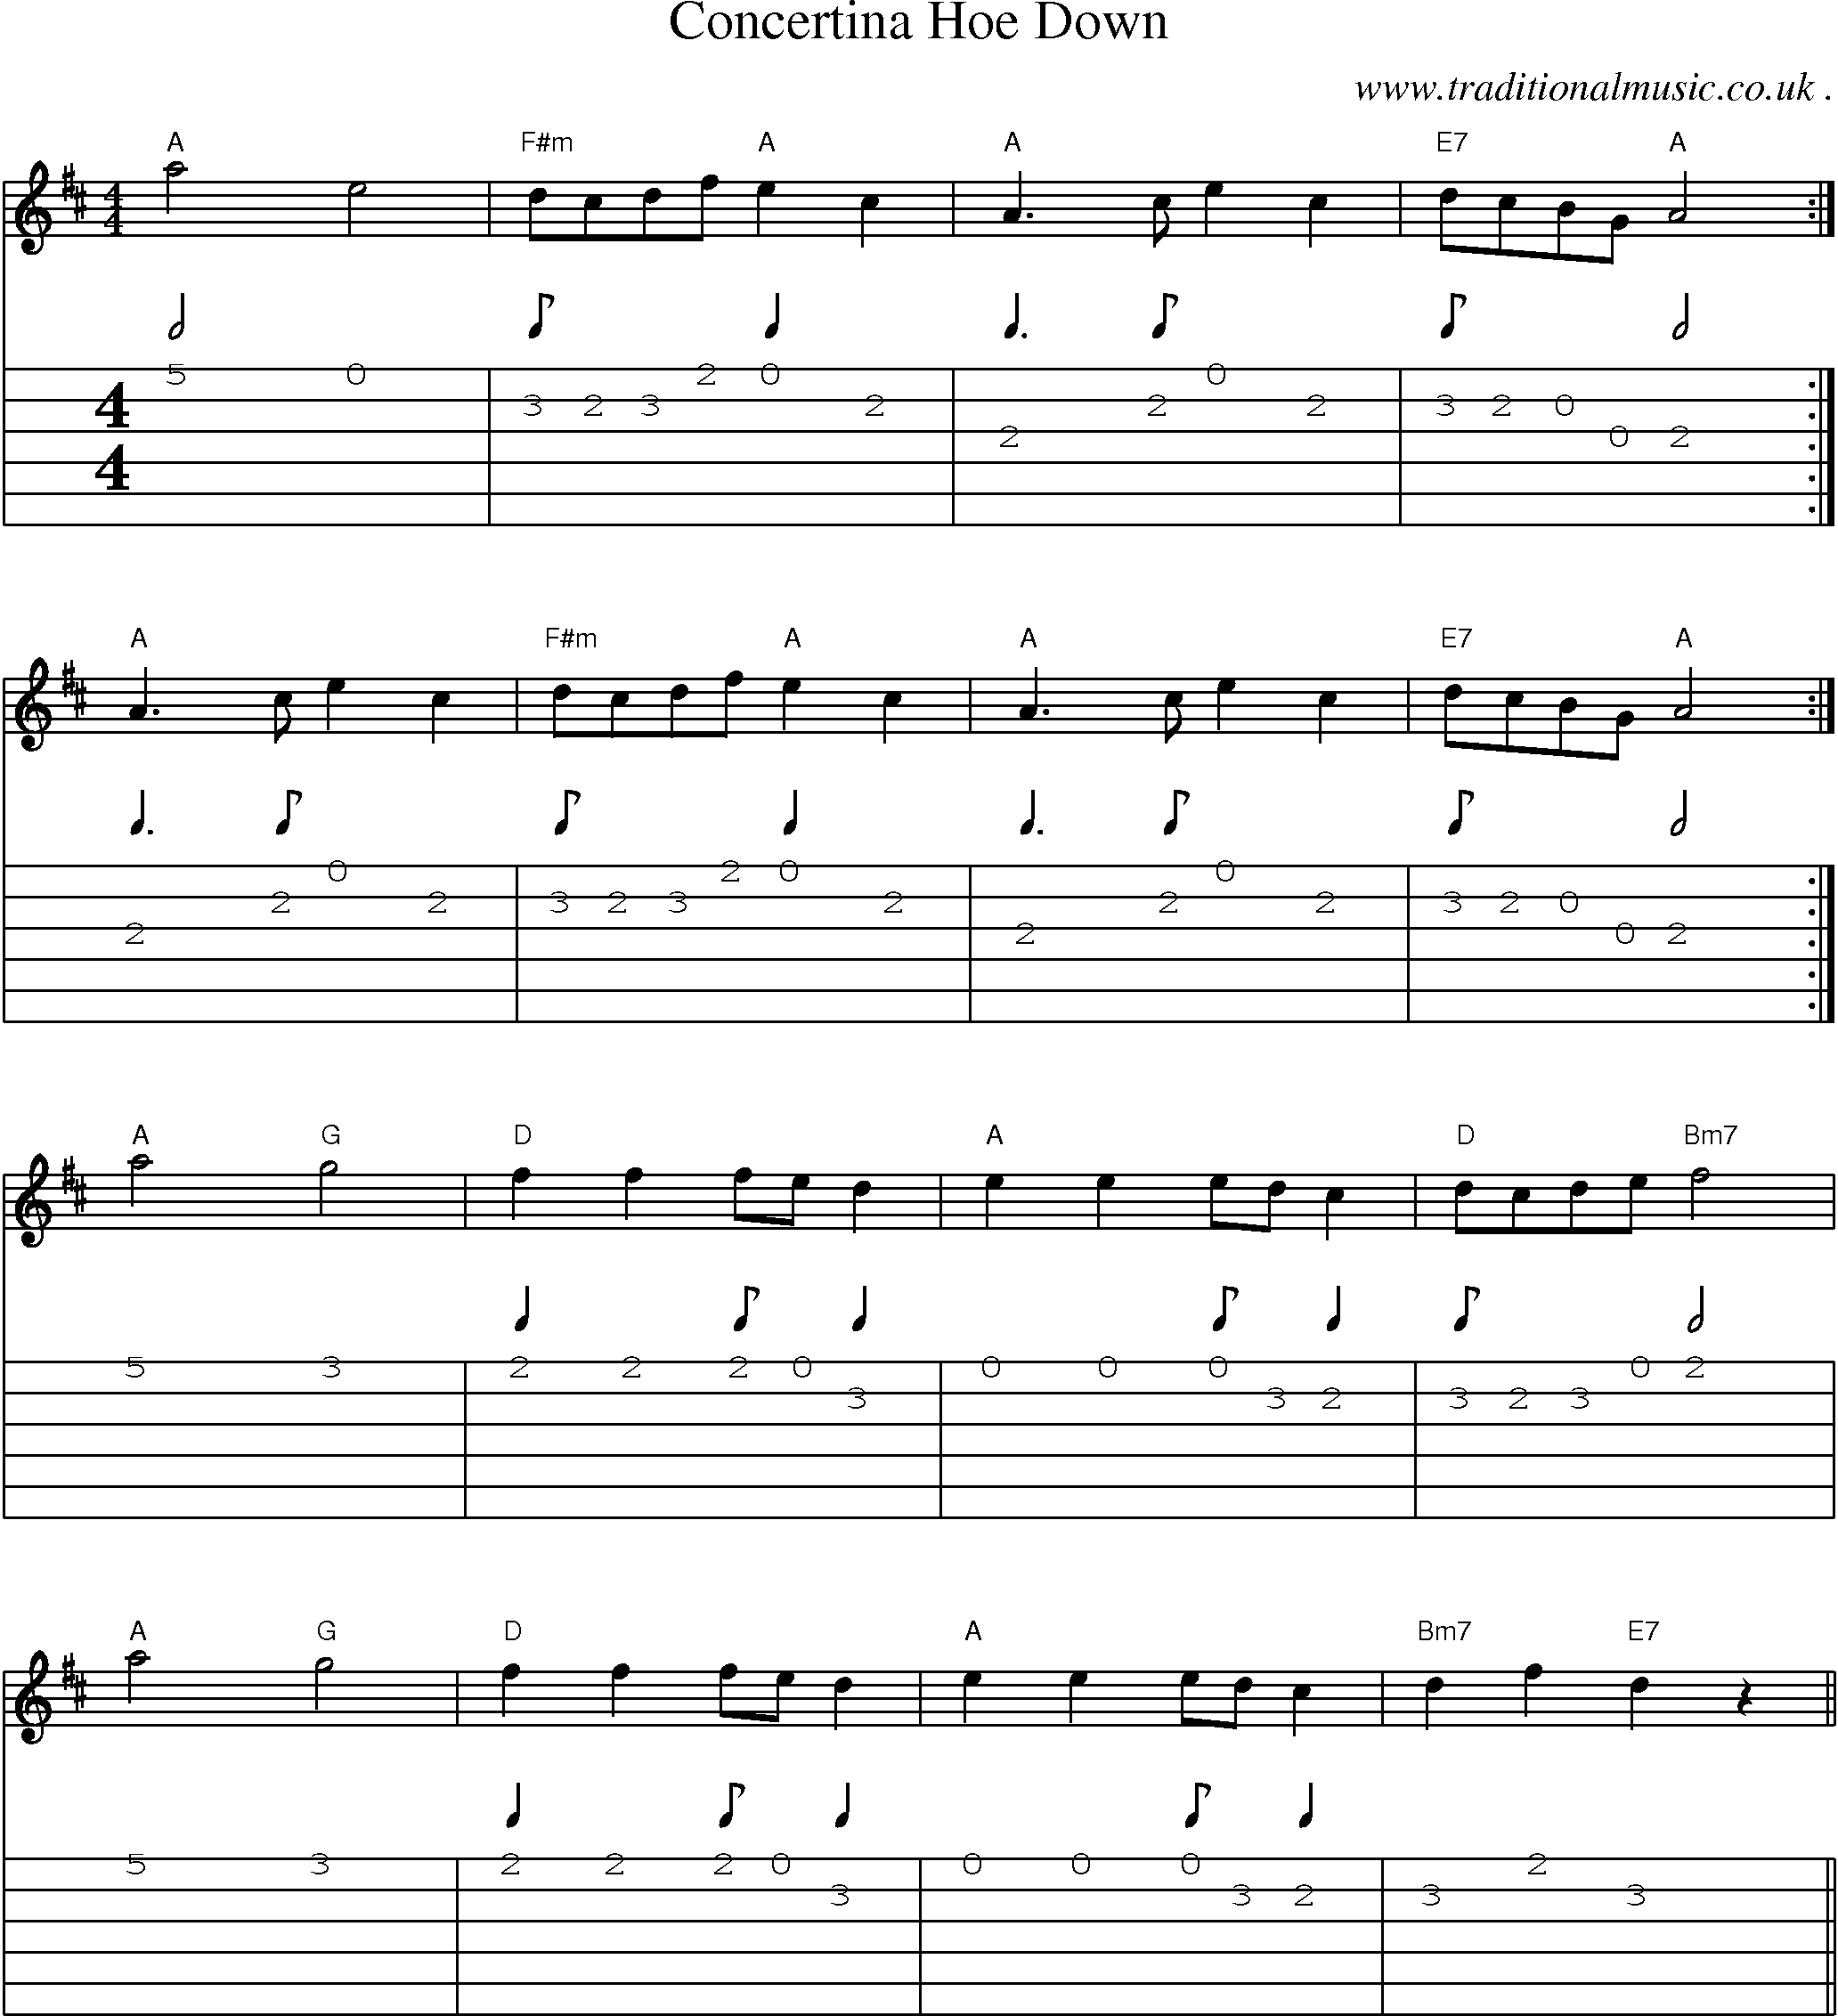 Sheet-Music and Guitar Tabs for Concertina Hoe Down